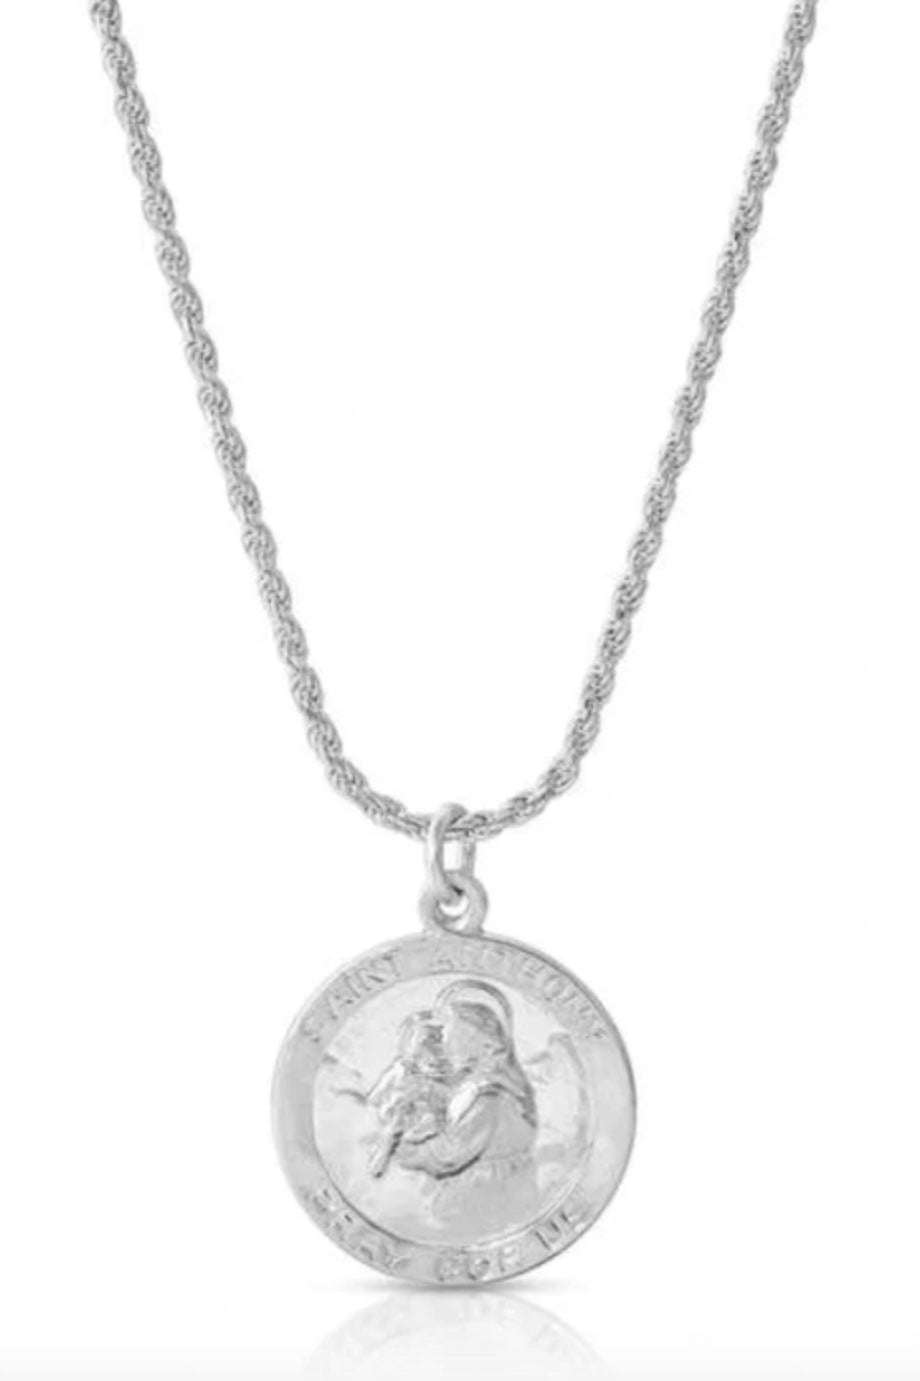 St. Anthony Necklace - Sterling Silver - The Canyon